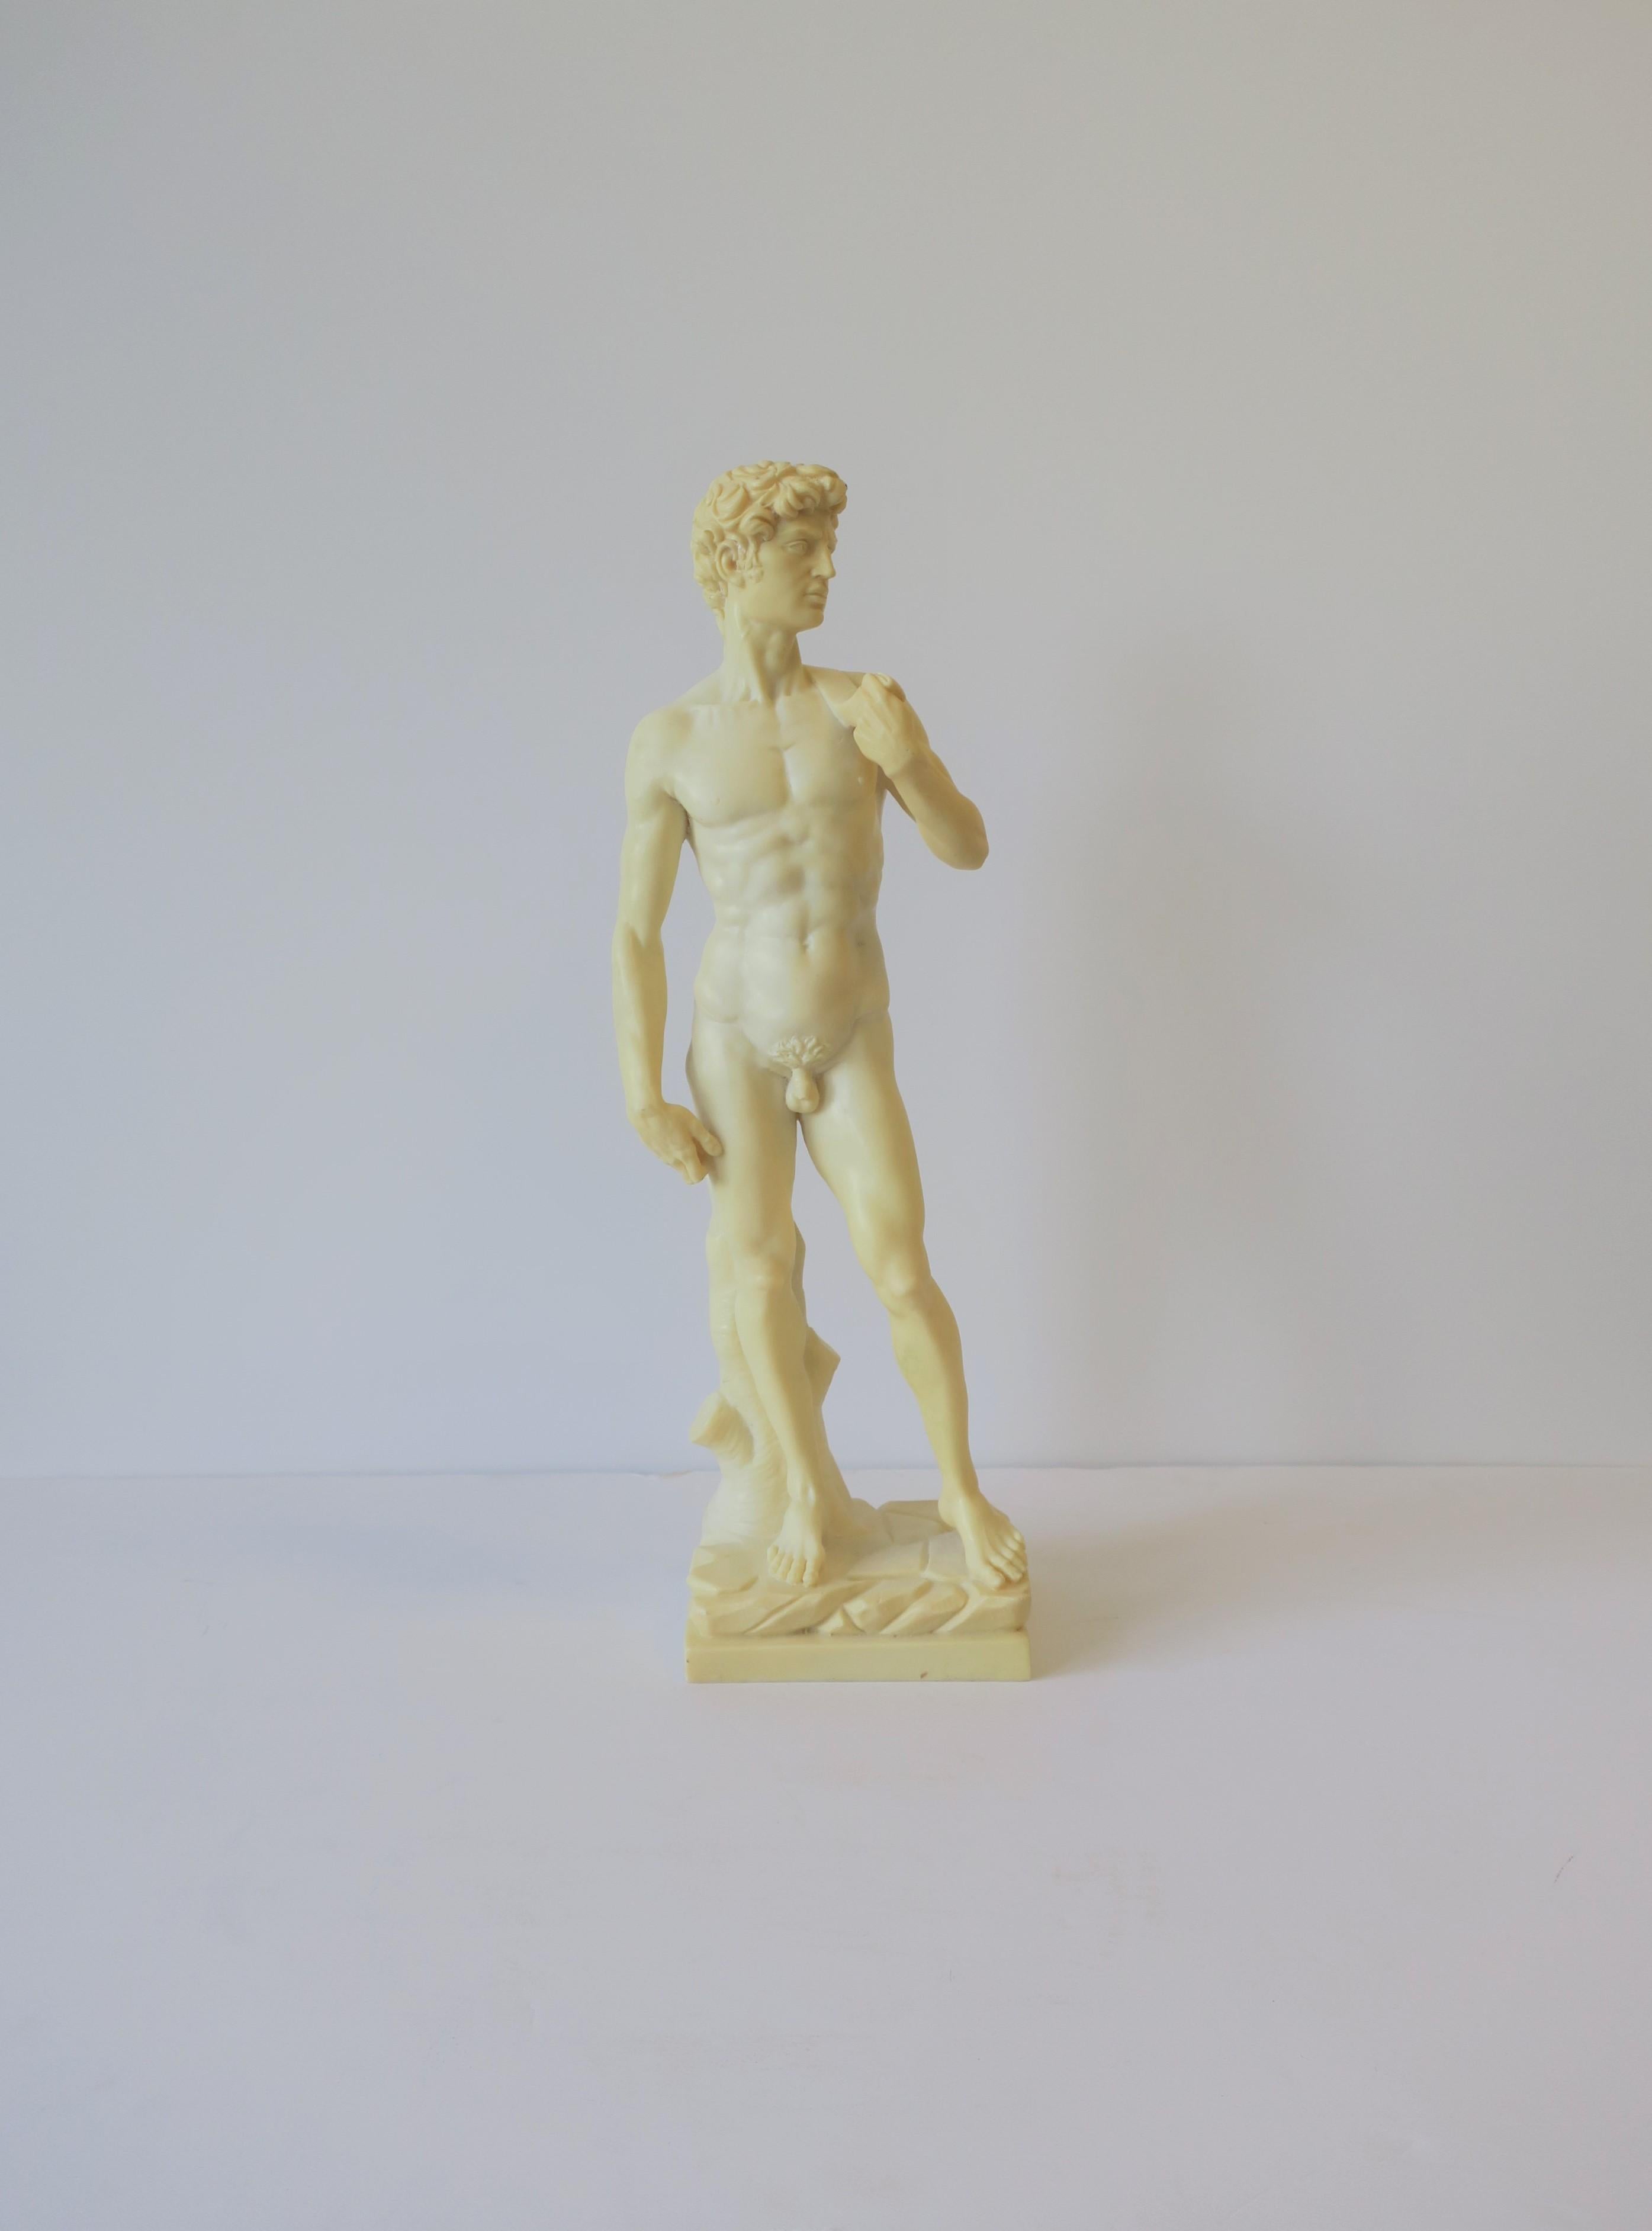 A Classic Italian Roman statue of the 'David' by sculptor G. Ruggeri, circa mid-20th century, Italy. With maker's mark's and marked 'Italy' as show in image #15. Sculpture is a nice size measuring: 15.5